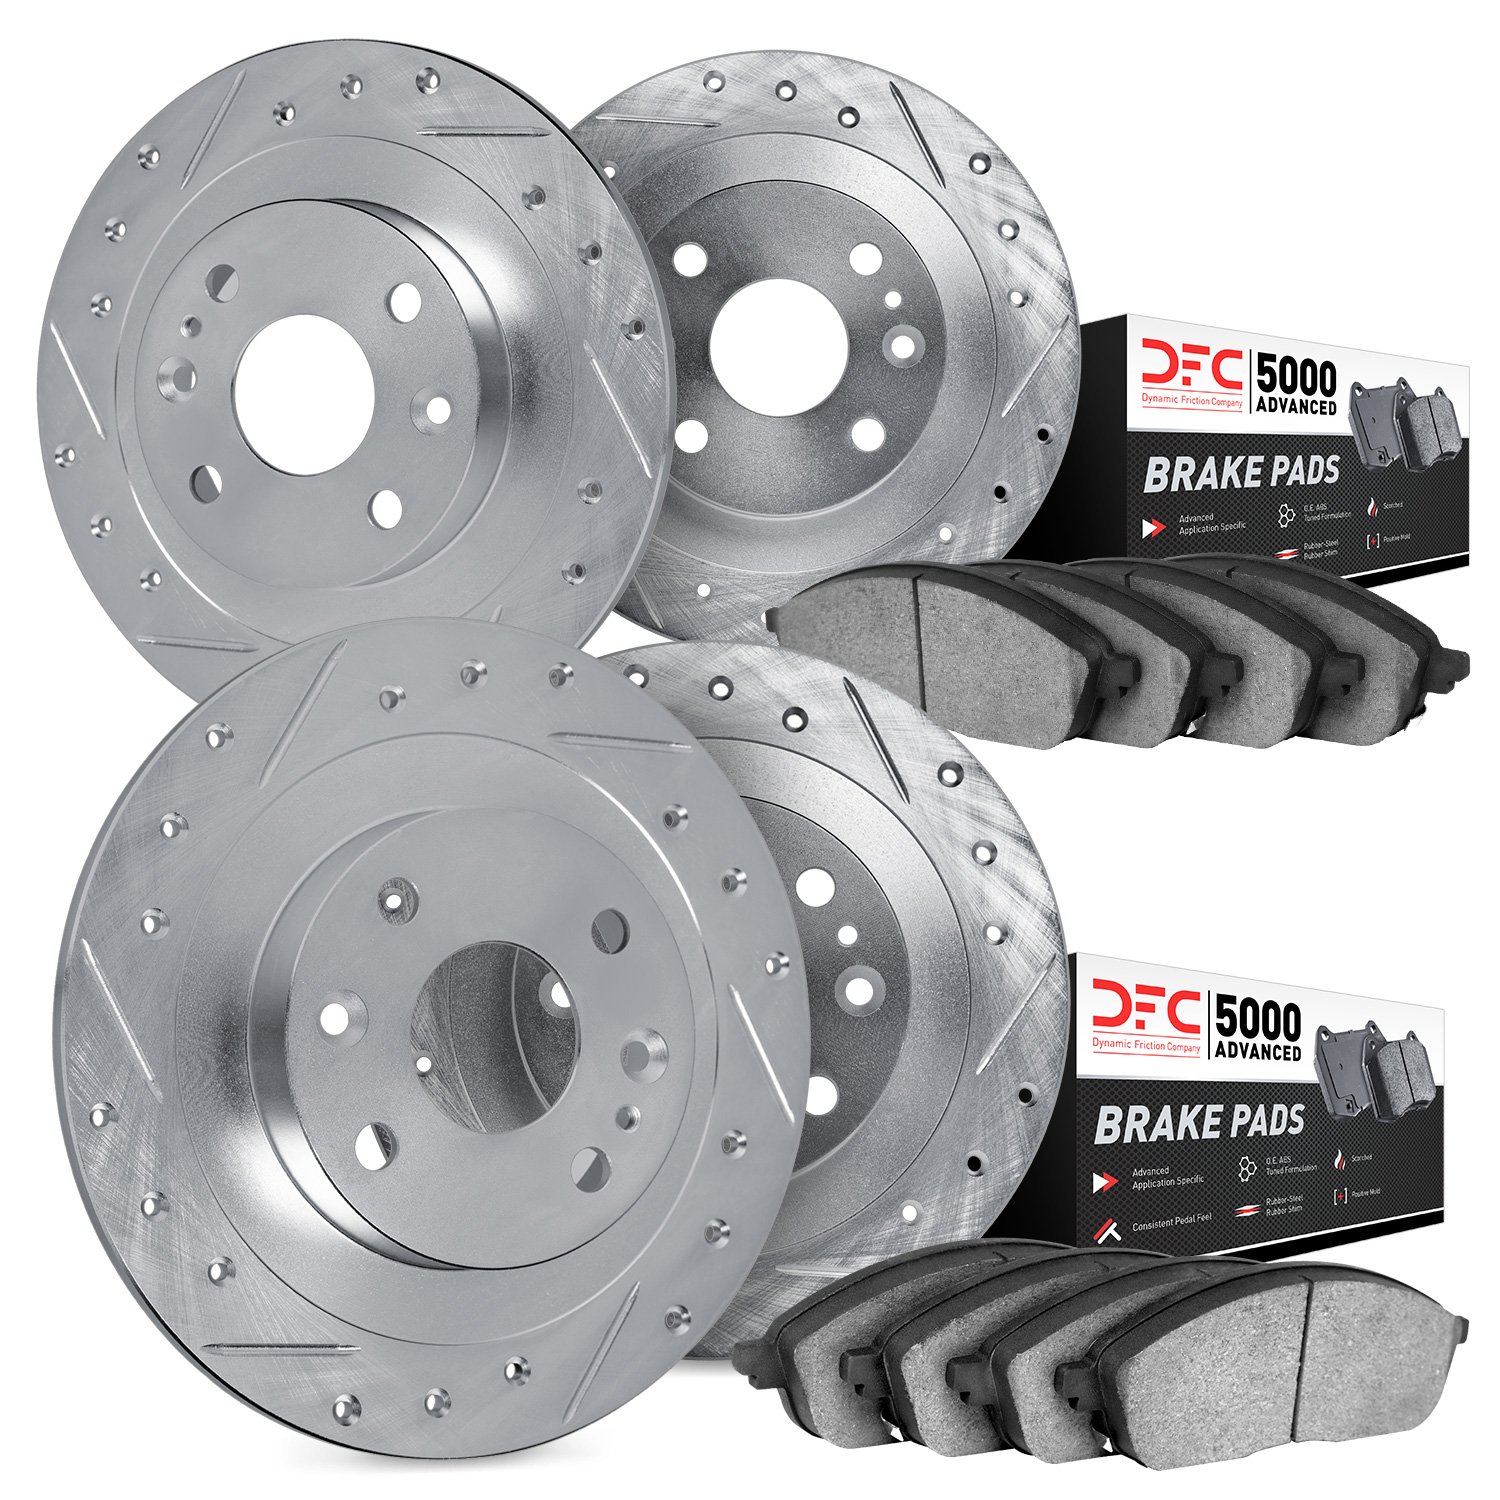 7504-07002 Drilled/Slotted Brake Rotors w/5000 Advanced Brake Pads Kit [Silver], 1966-1967 Mopar, Position: Front and Rear